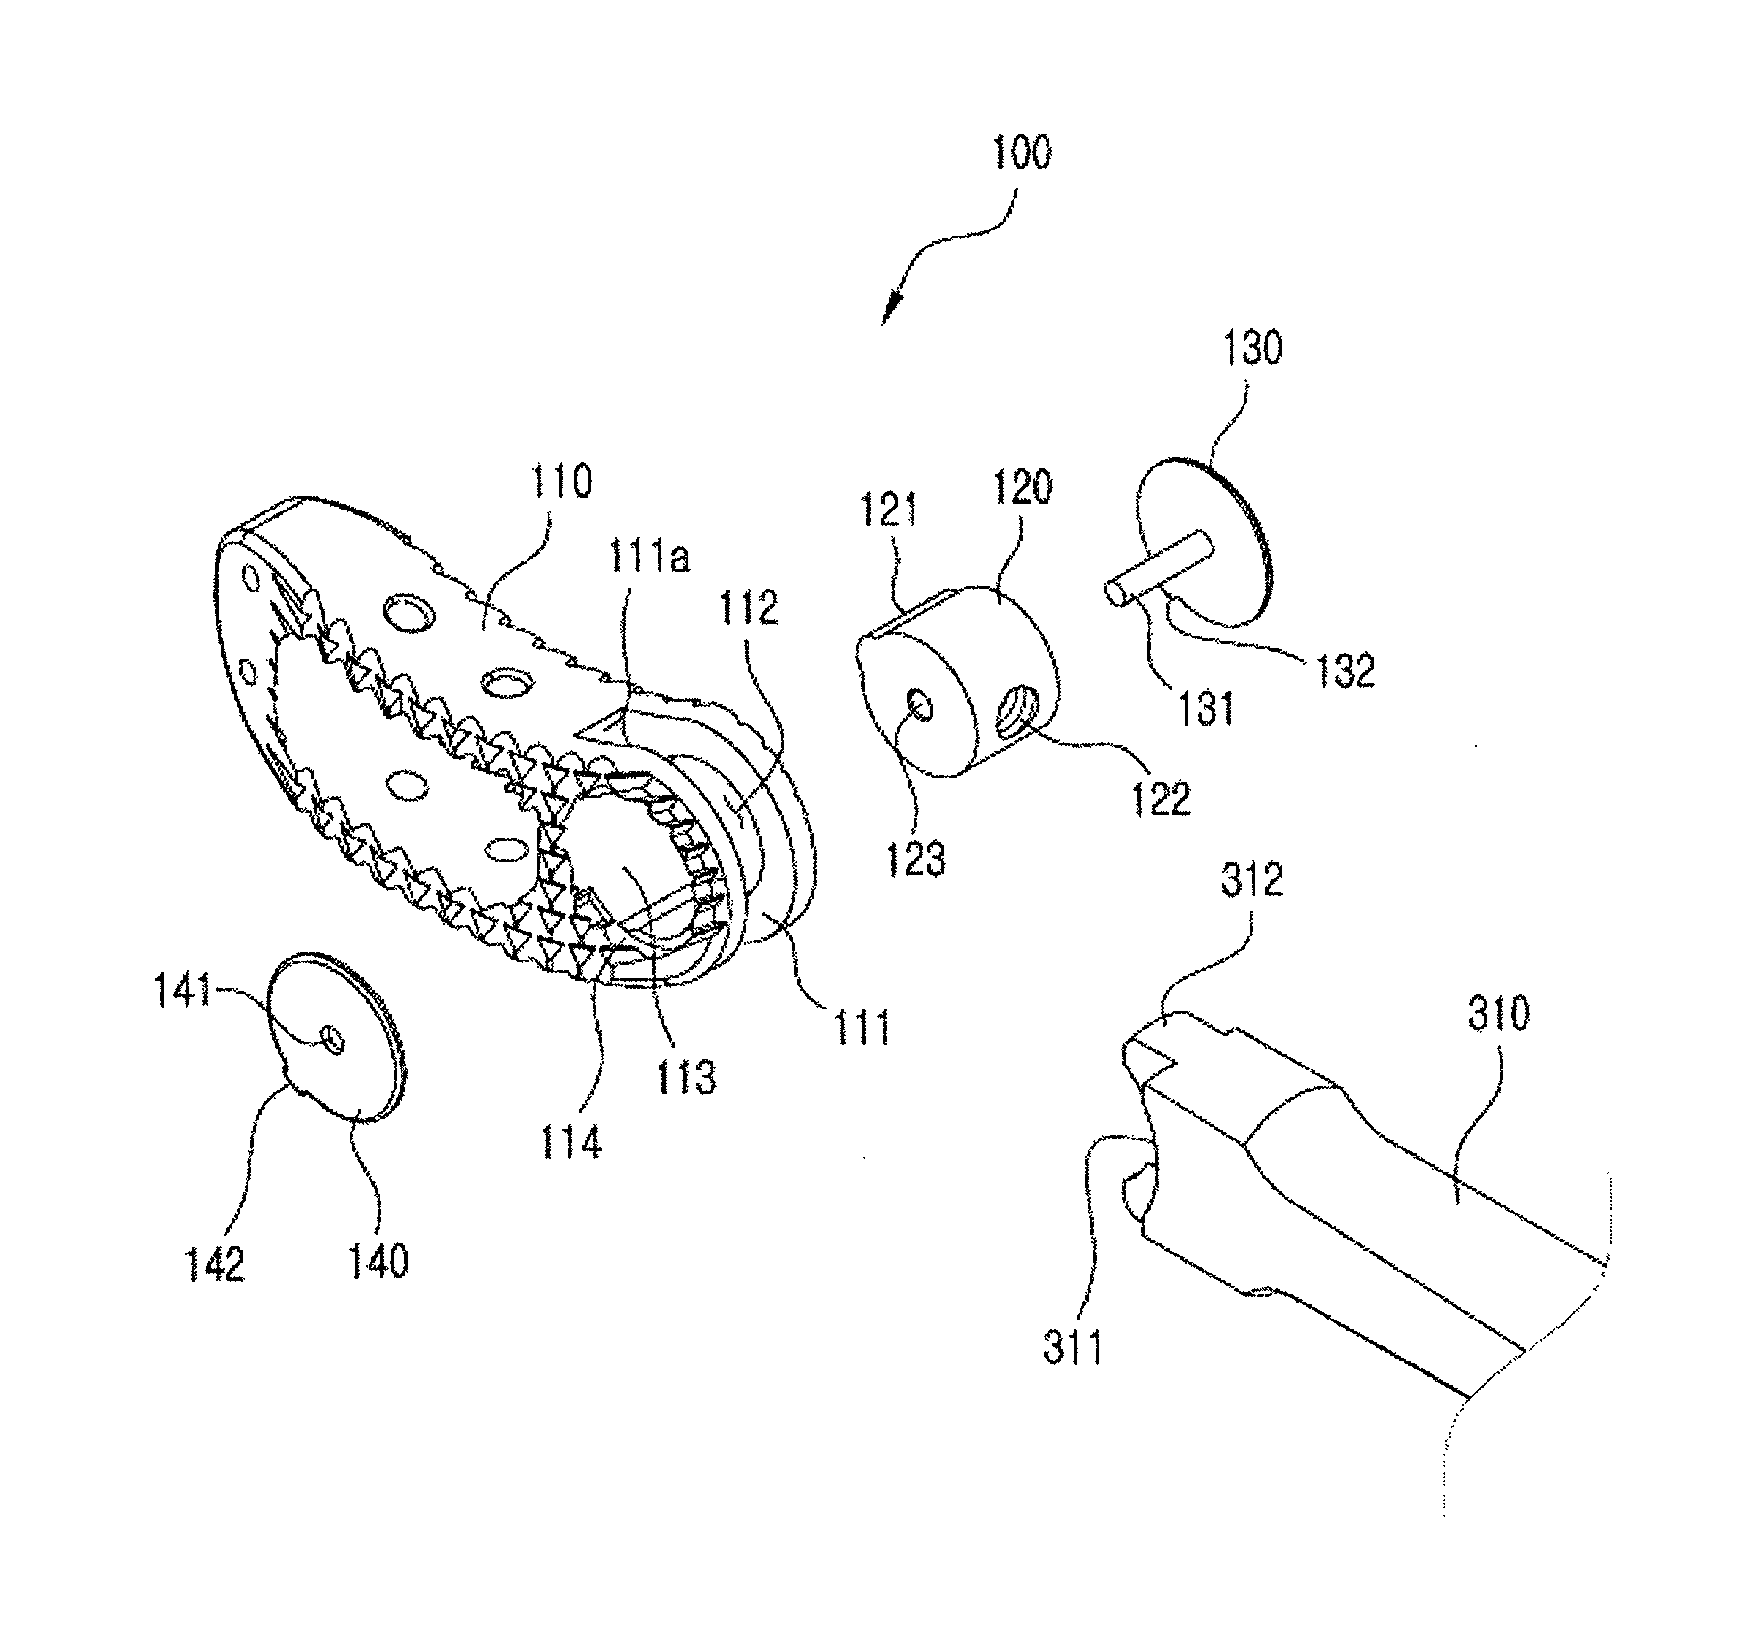 Artificial disk for transforaminal lumbar interbody fusion (TLIF) and insertion assembly thereof